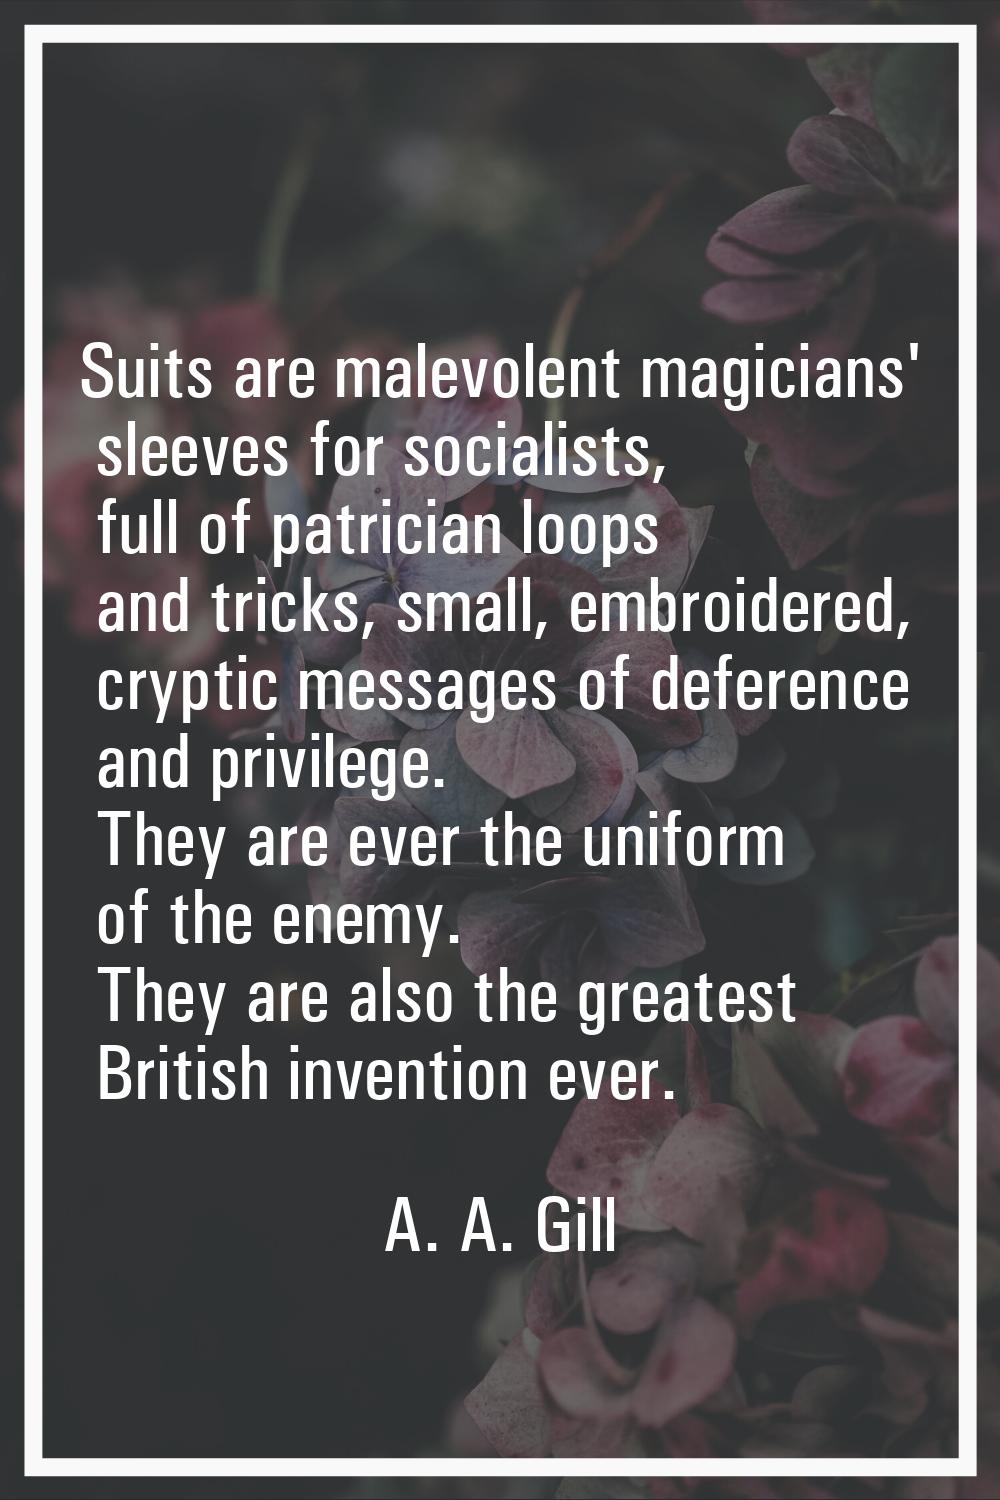 Suits are malevolent magicians' sleeves for socialists, full of patrician loops and tricks, small, 